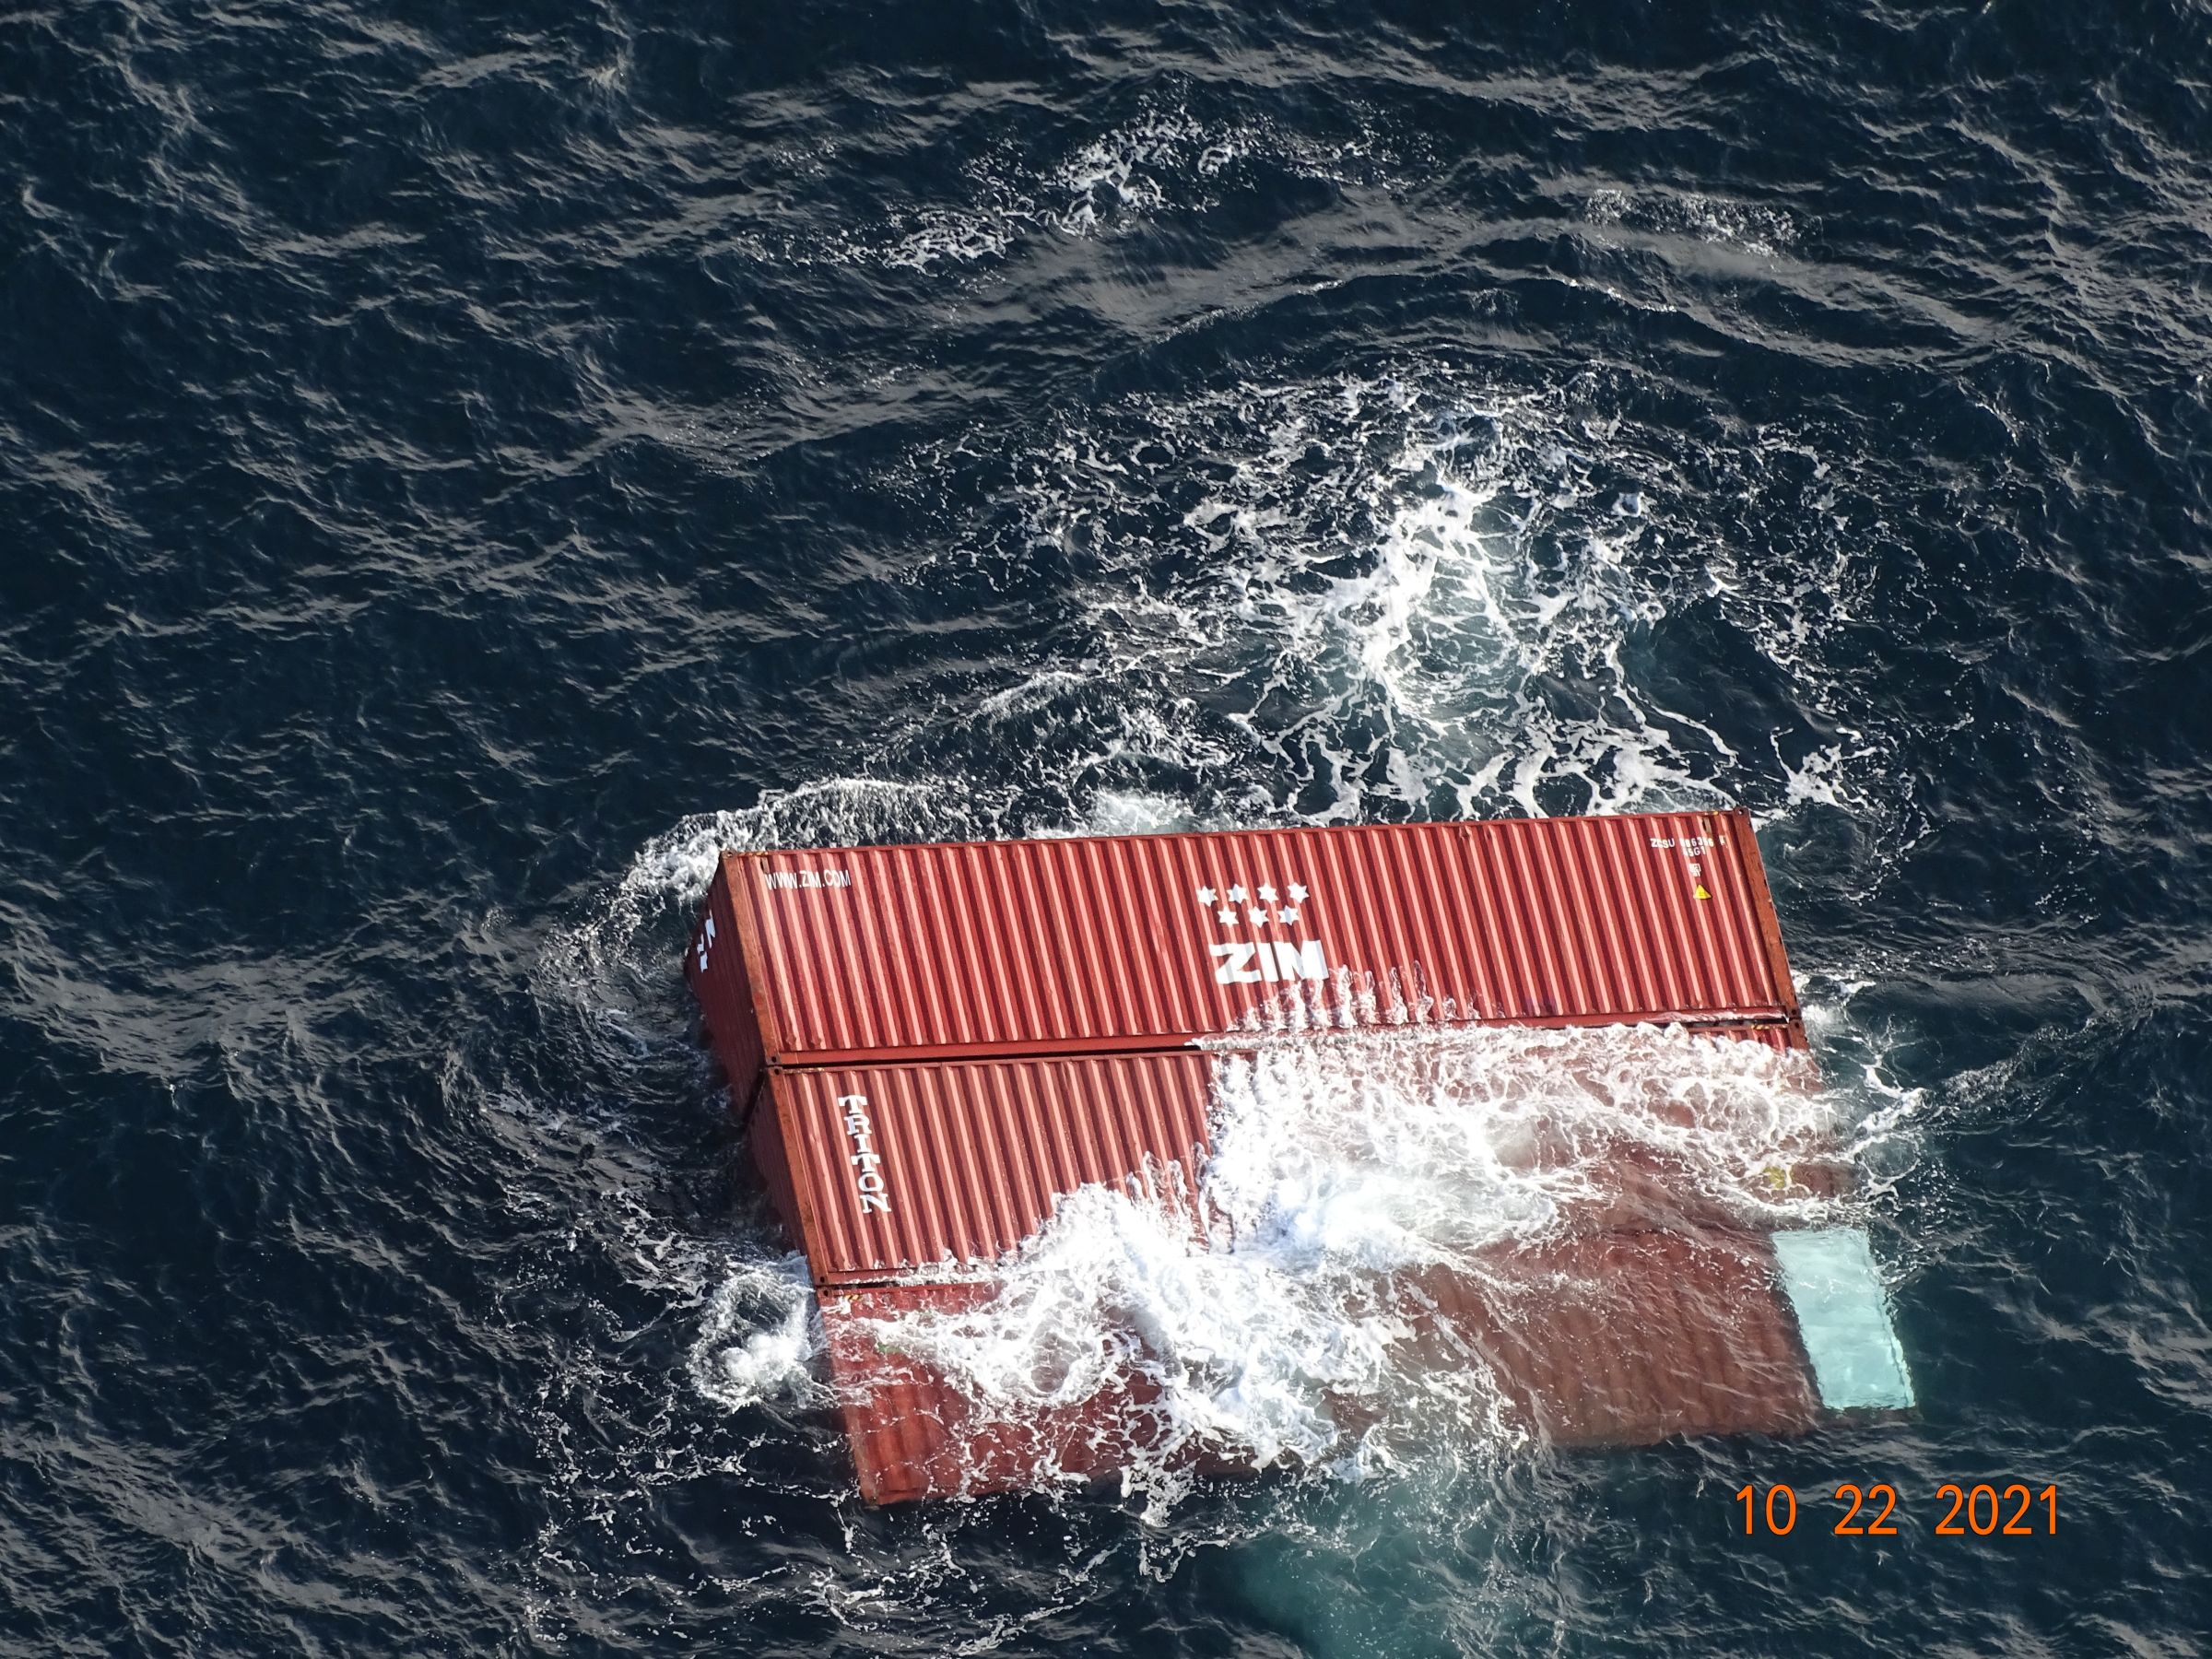 Zim Kingston's fallen shipping container in the water